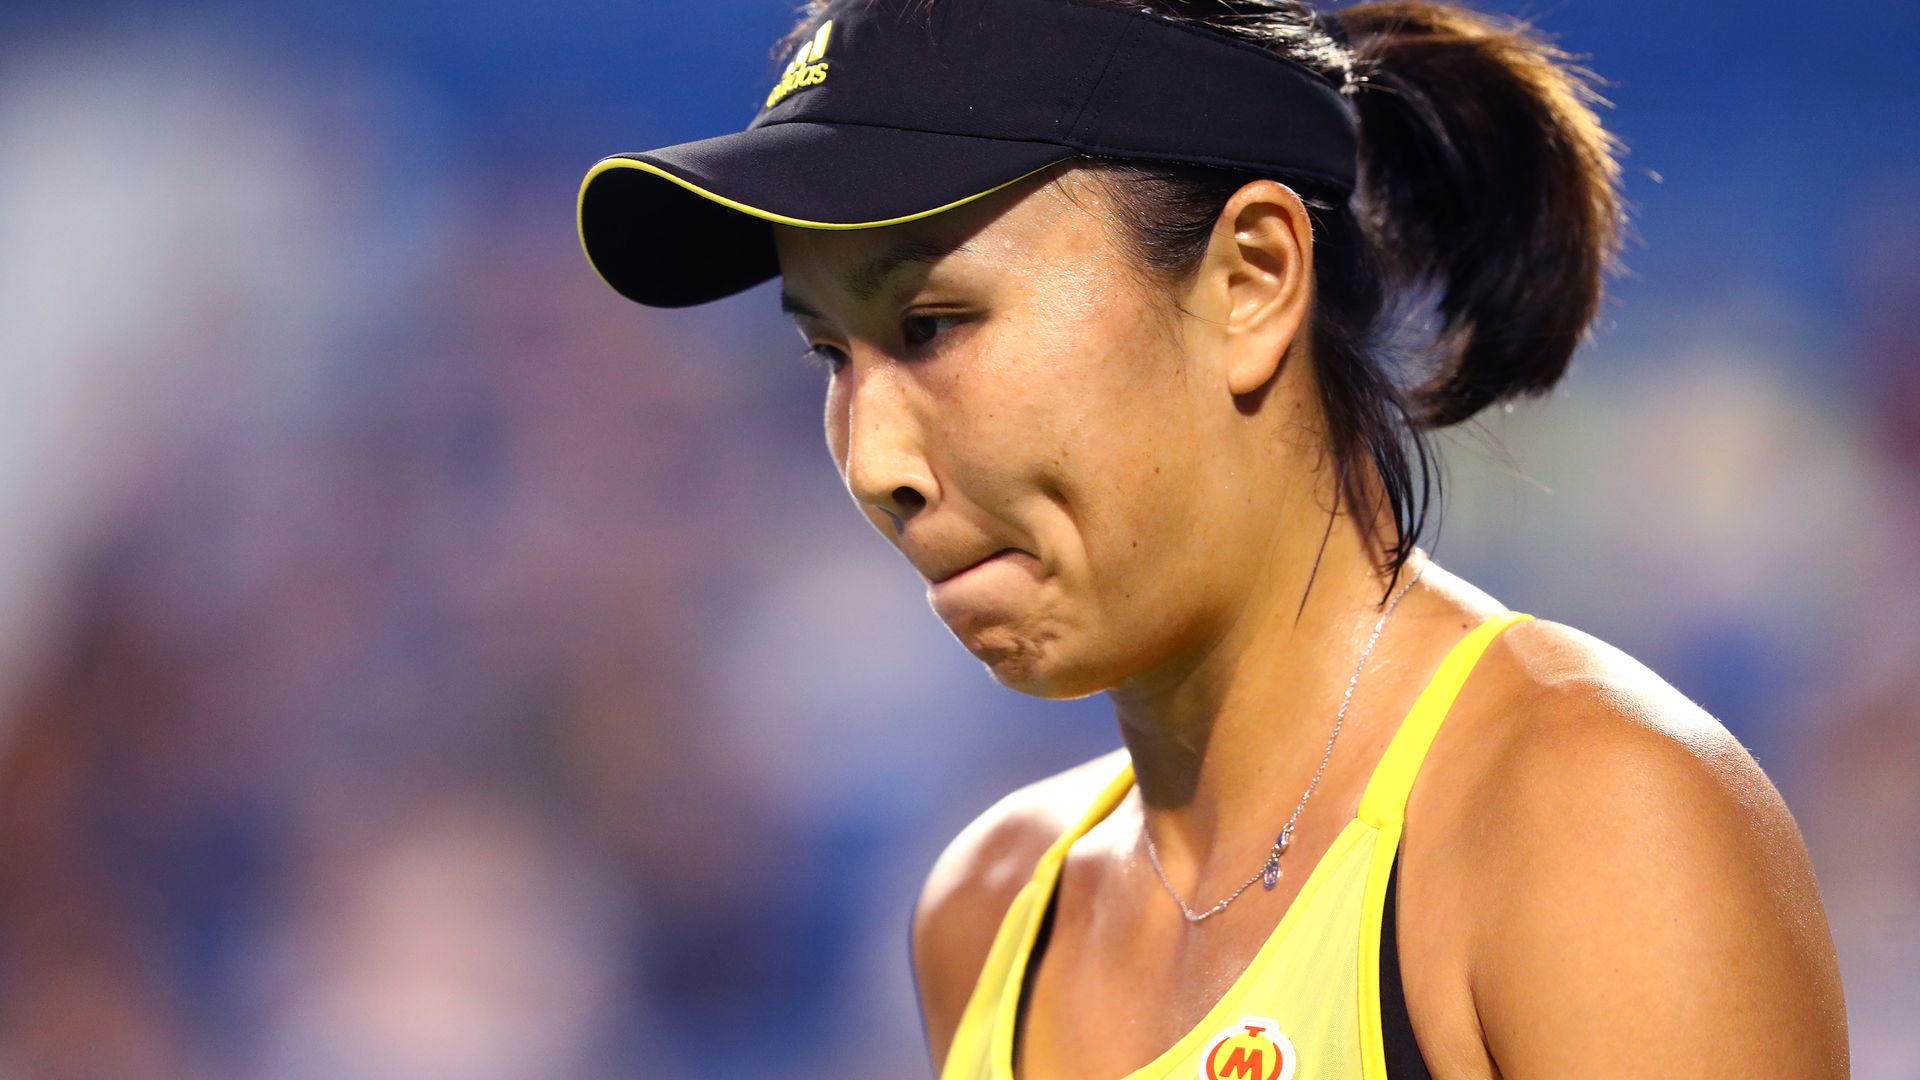 Peng Shuai of China looks on during her match against during the Connecticut Open in 2017.